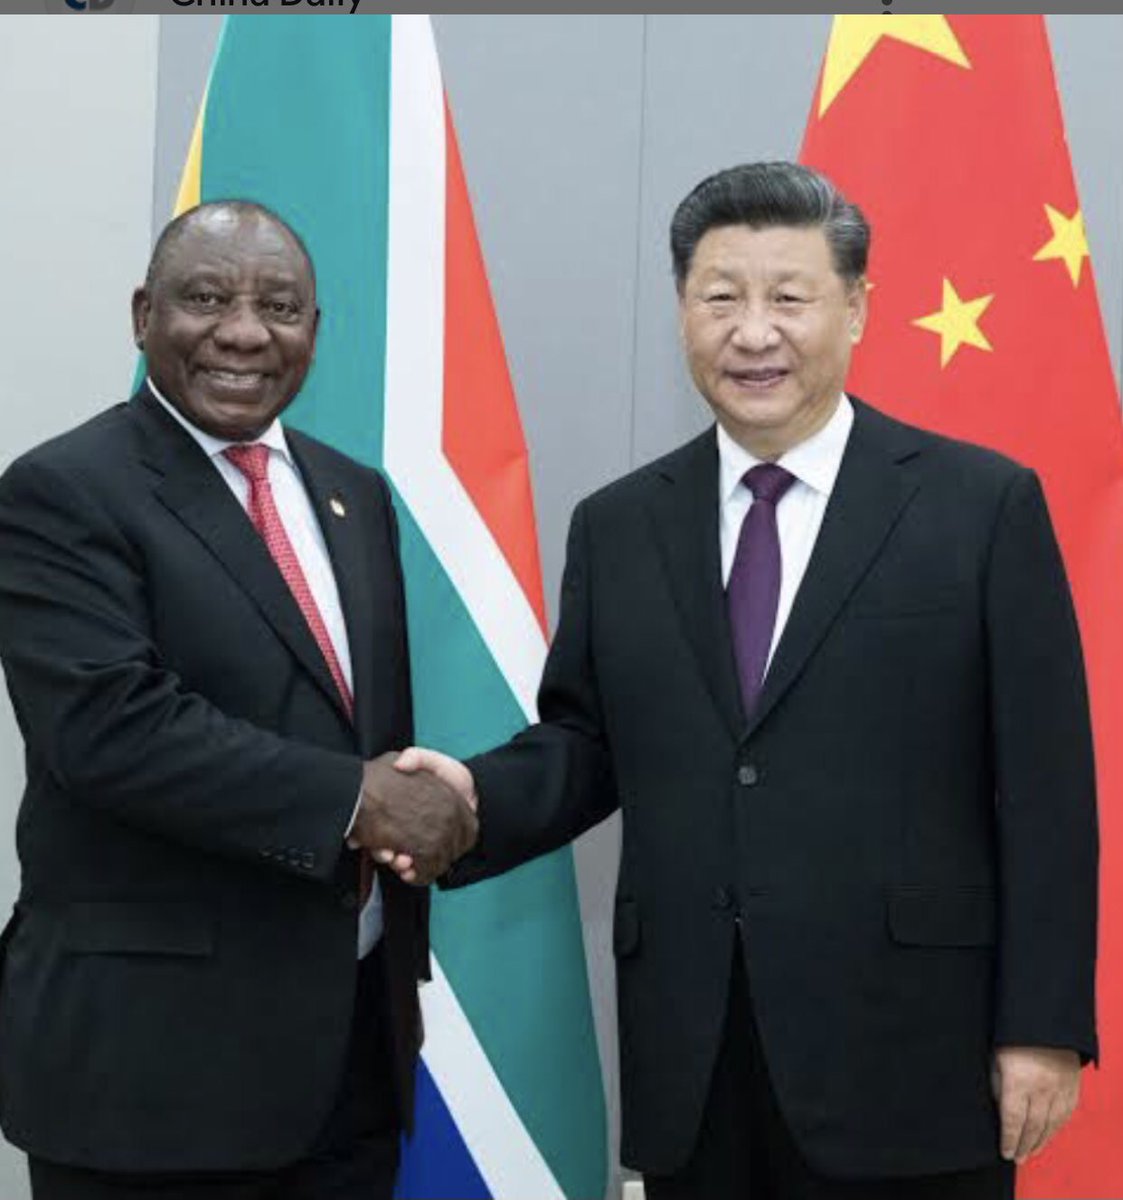 Powerful words of the President of China, Xi Jinping, 
“ South Africa under the leadership of the brilliant Cyril Ramaphosa is a serious  player in the world” 
Let’s not get into what this implies about Jacob Zuma 😉😉

#BRICSSummit2023 🇧🇷🇷🇺🇮🇳🇨🇳🇿🇦
#BetterAfricaBetterWorld 🌍